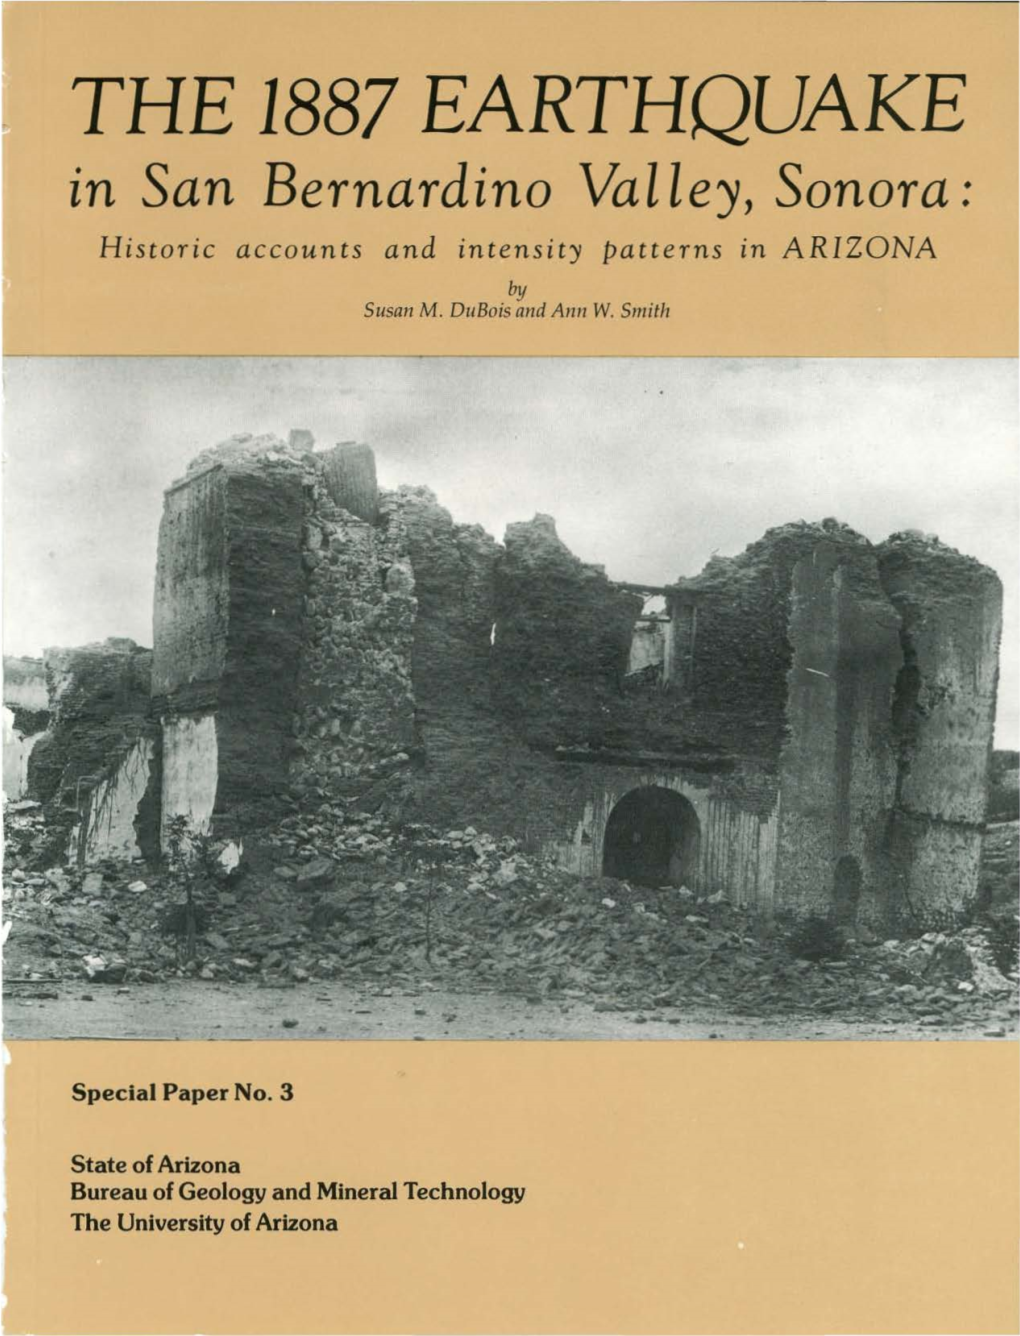 THE 1887 EARTHQUAKE in San Bernardino Valley, Sonora : His Toric Account S a Nd Inten Sity Patterns in ARIZONA by Susan M